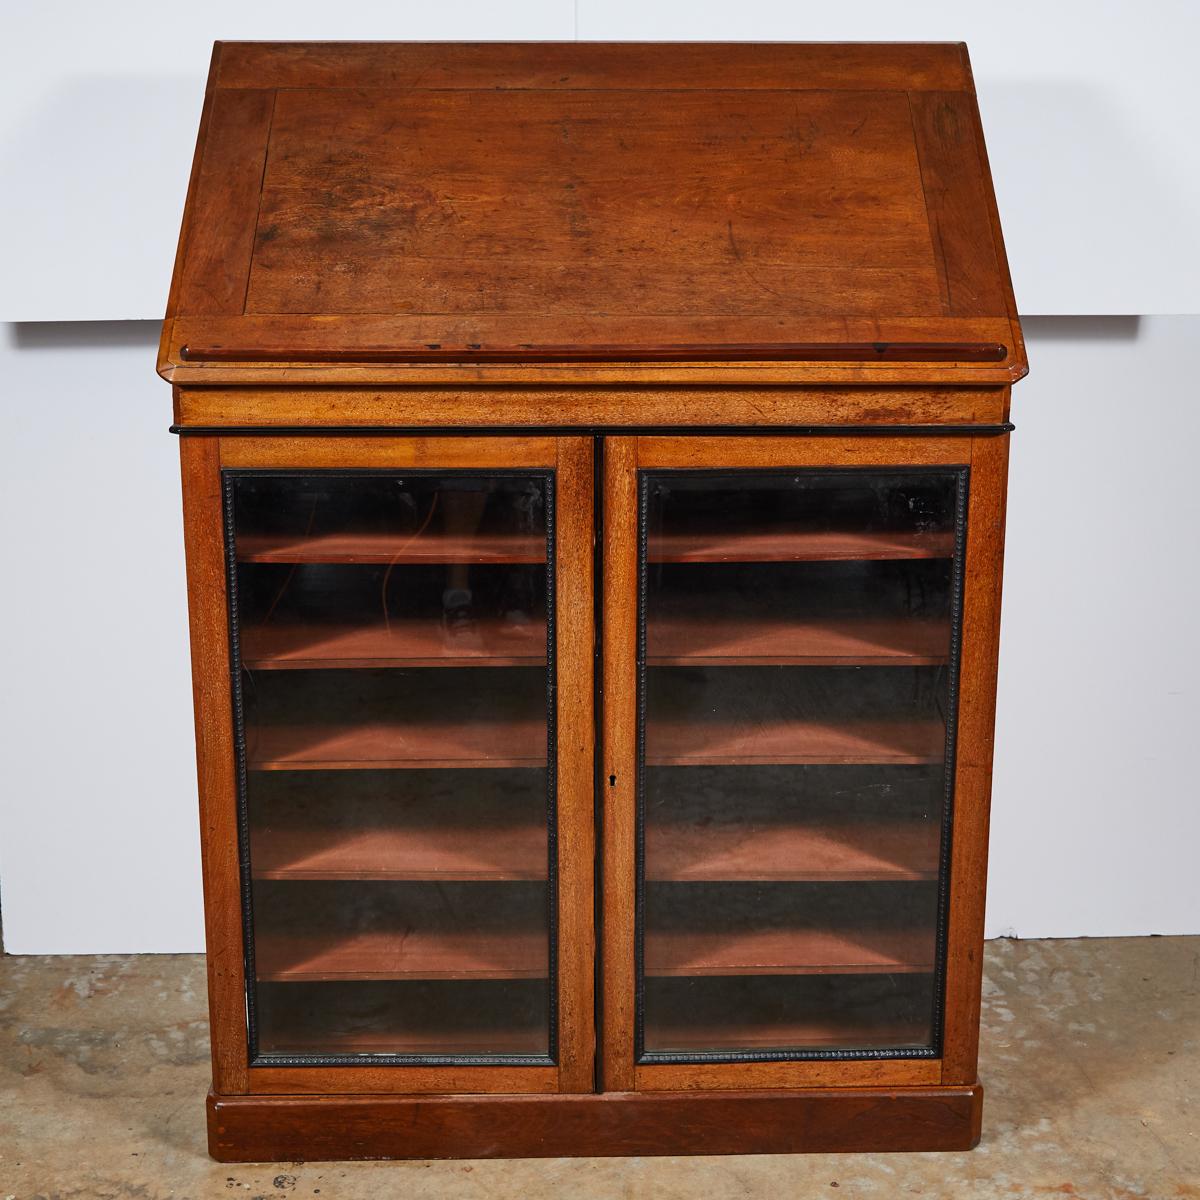 1820s English William IV mahogany portfolio cabinet. A William IV portfolio cabinet in mahogany with glazed door and adjustable shelves. The front and back beveled glazed doors are fitted with carved moldings. Cabinet sides with brass pulls open to